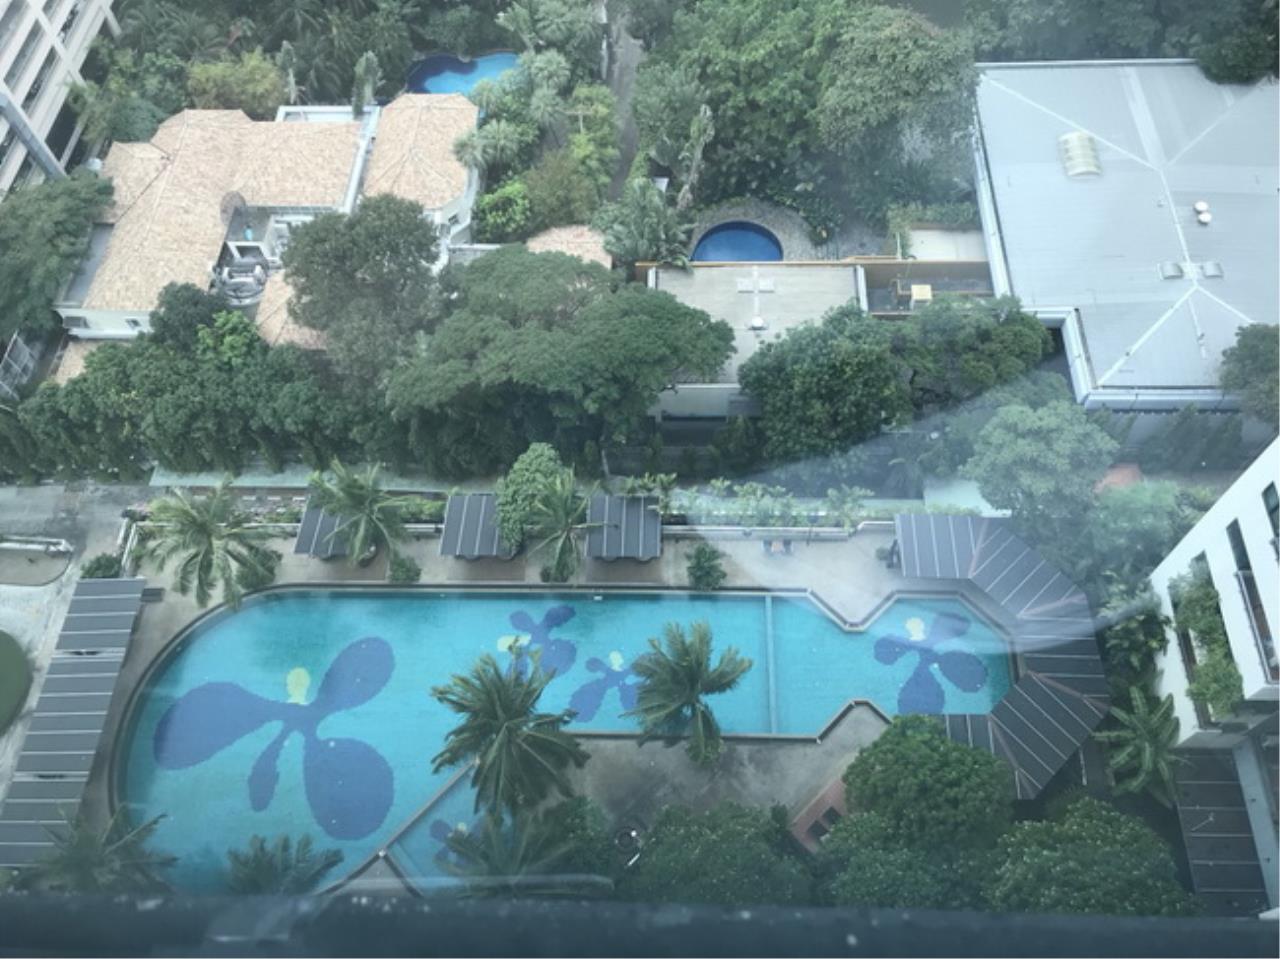 Forbest Properties Agency's 37797 - Sathorn Garden, Sathorn Rd., Condo for sale, area 66 Sq.m. 2